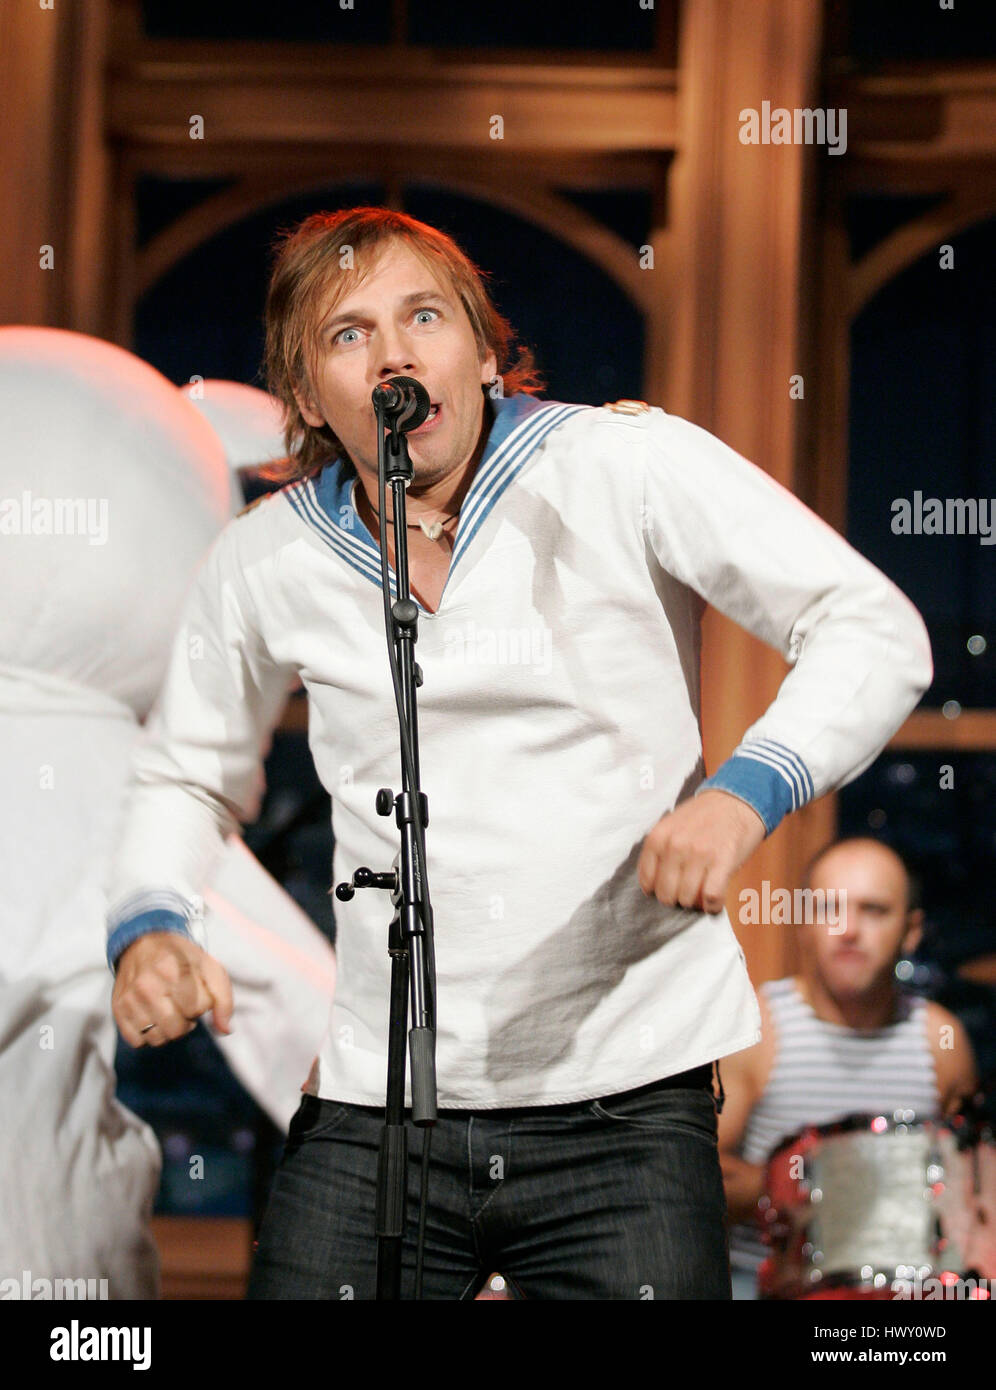 The Russian rock group, "Mumiy Troll" with band members, Ilya Lagutenko on  lead vocals, perform during a segment of the "Late Late Show with Craig  Ferguson" at CBS Television City in Los